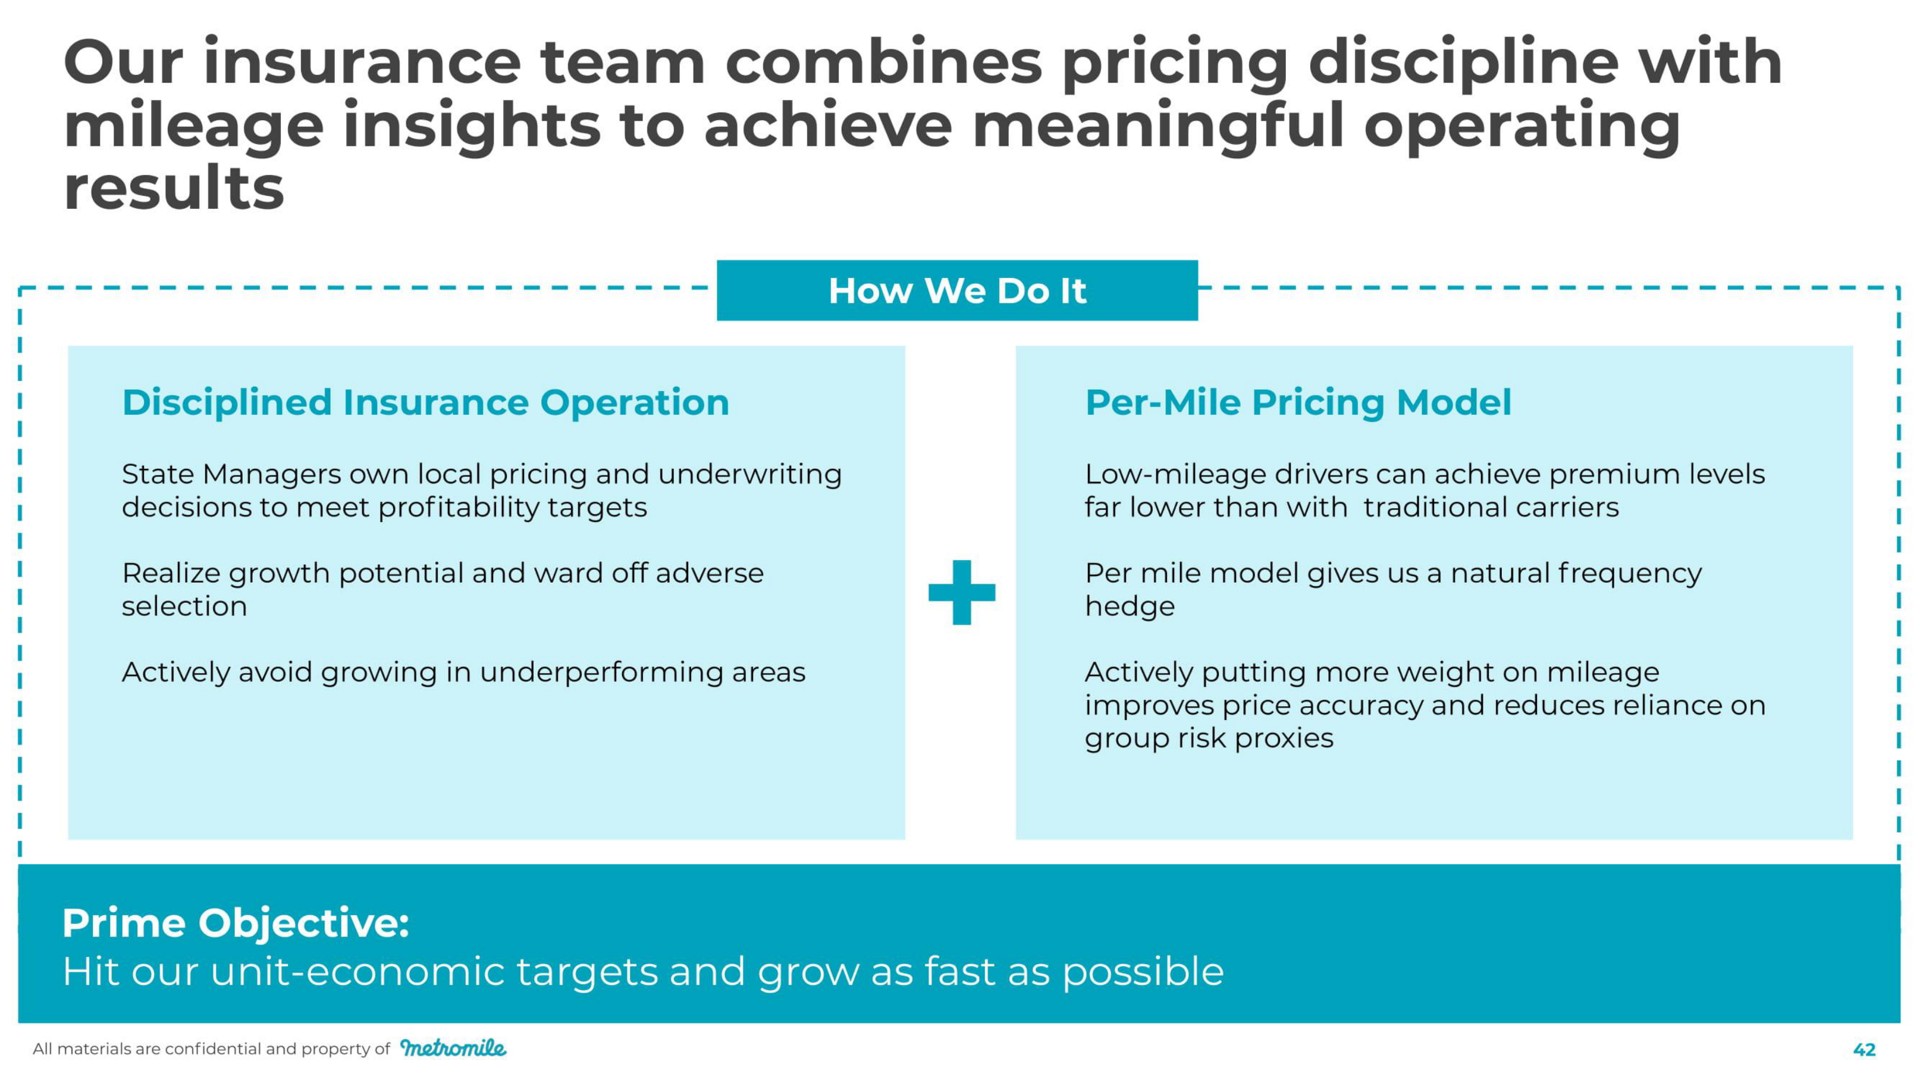 our insurance team combines pricing discipline with mileage insights to achieve meaningful operating results | Metromile